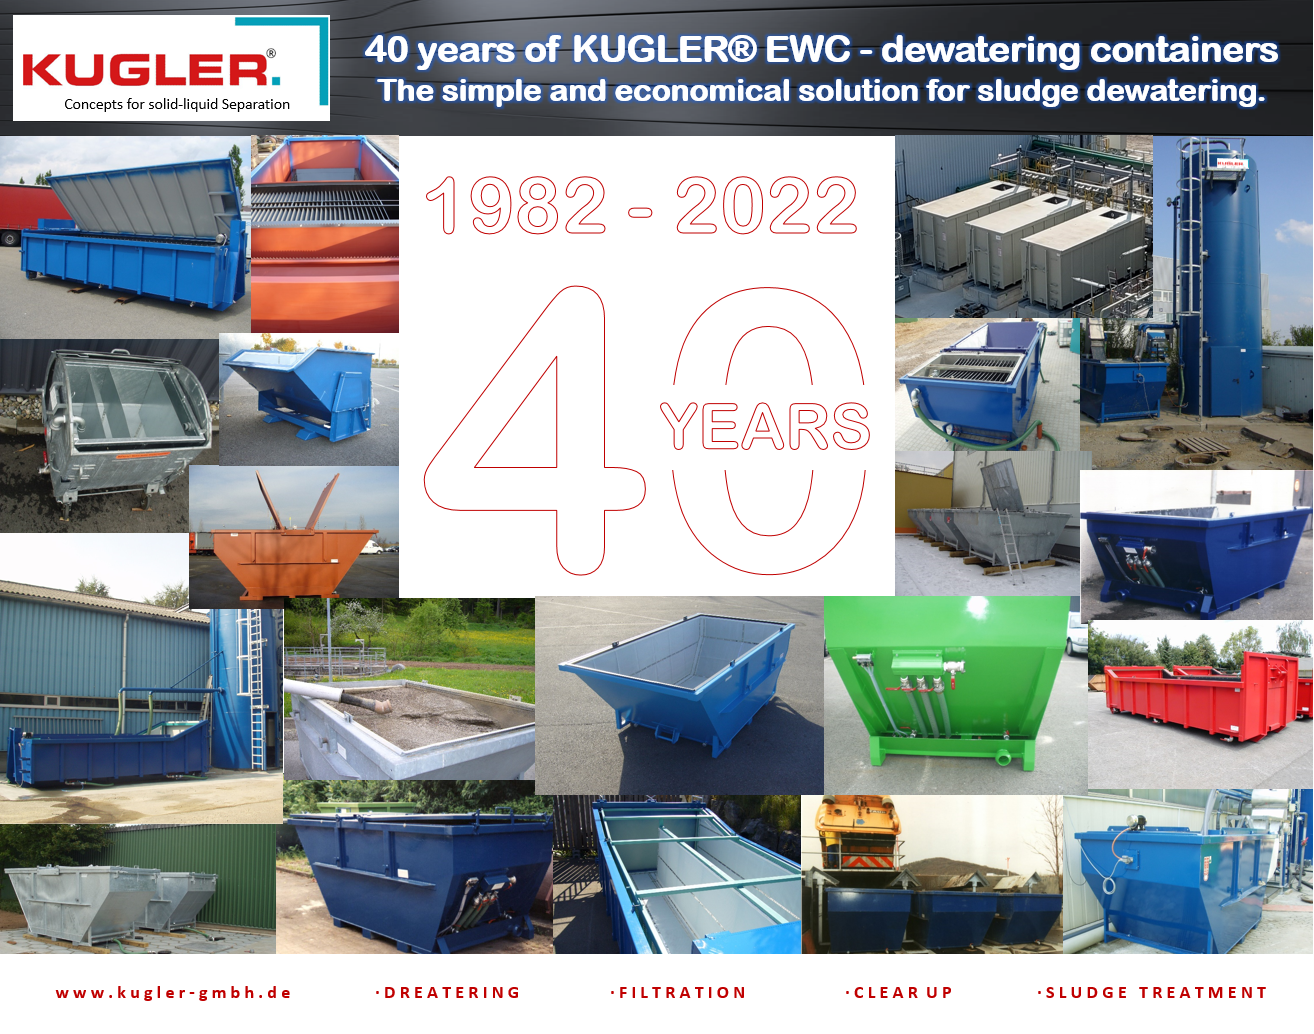 40 YEARS OF KUGLER® EWC - Dewatering Containers